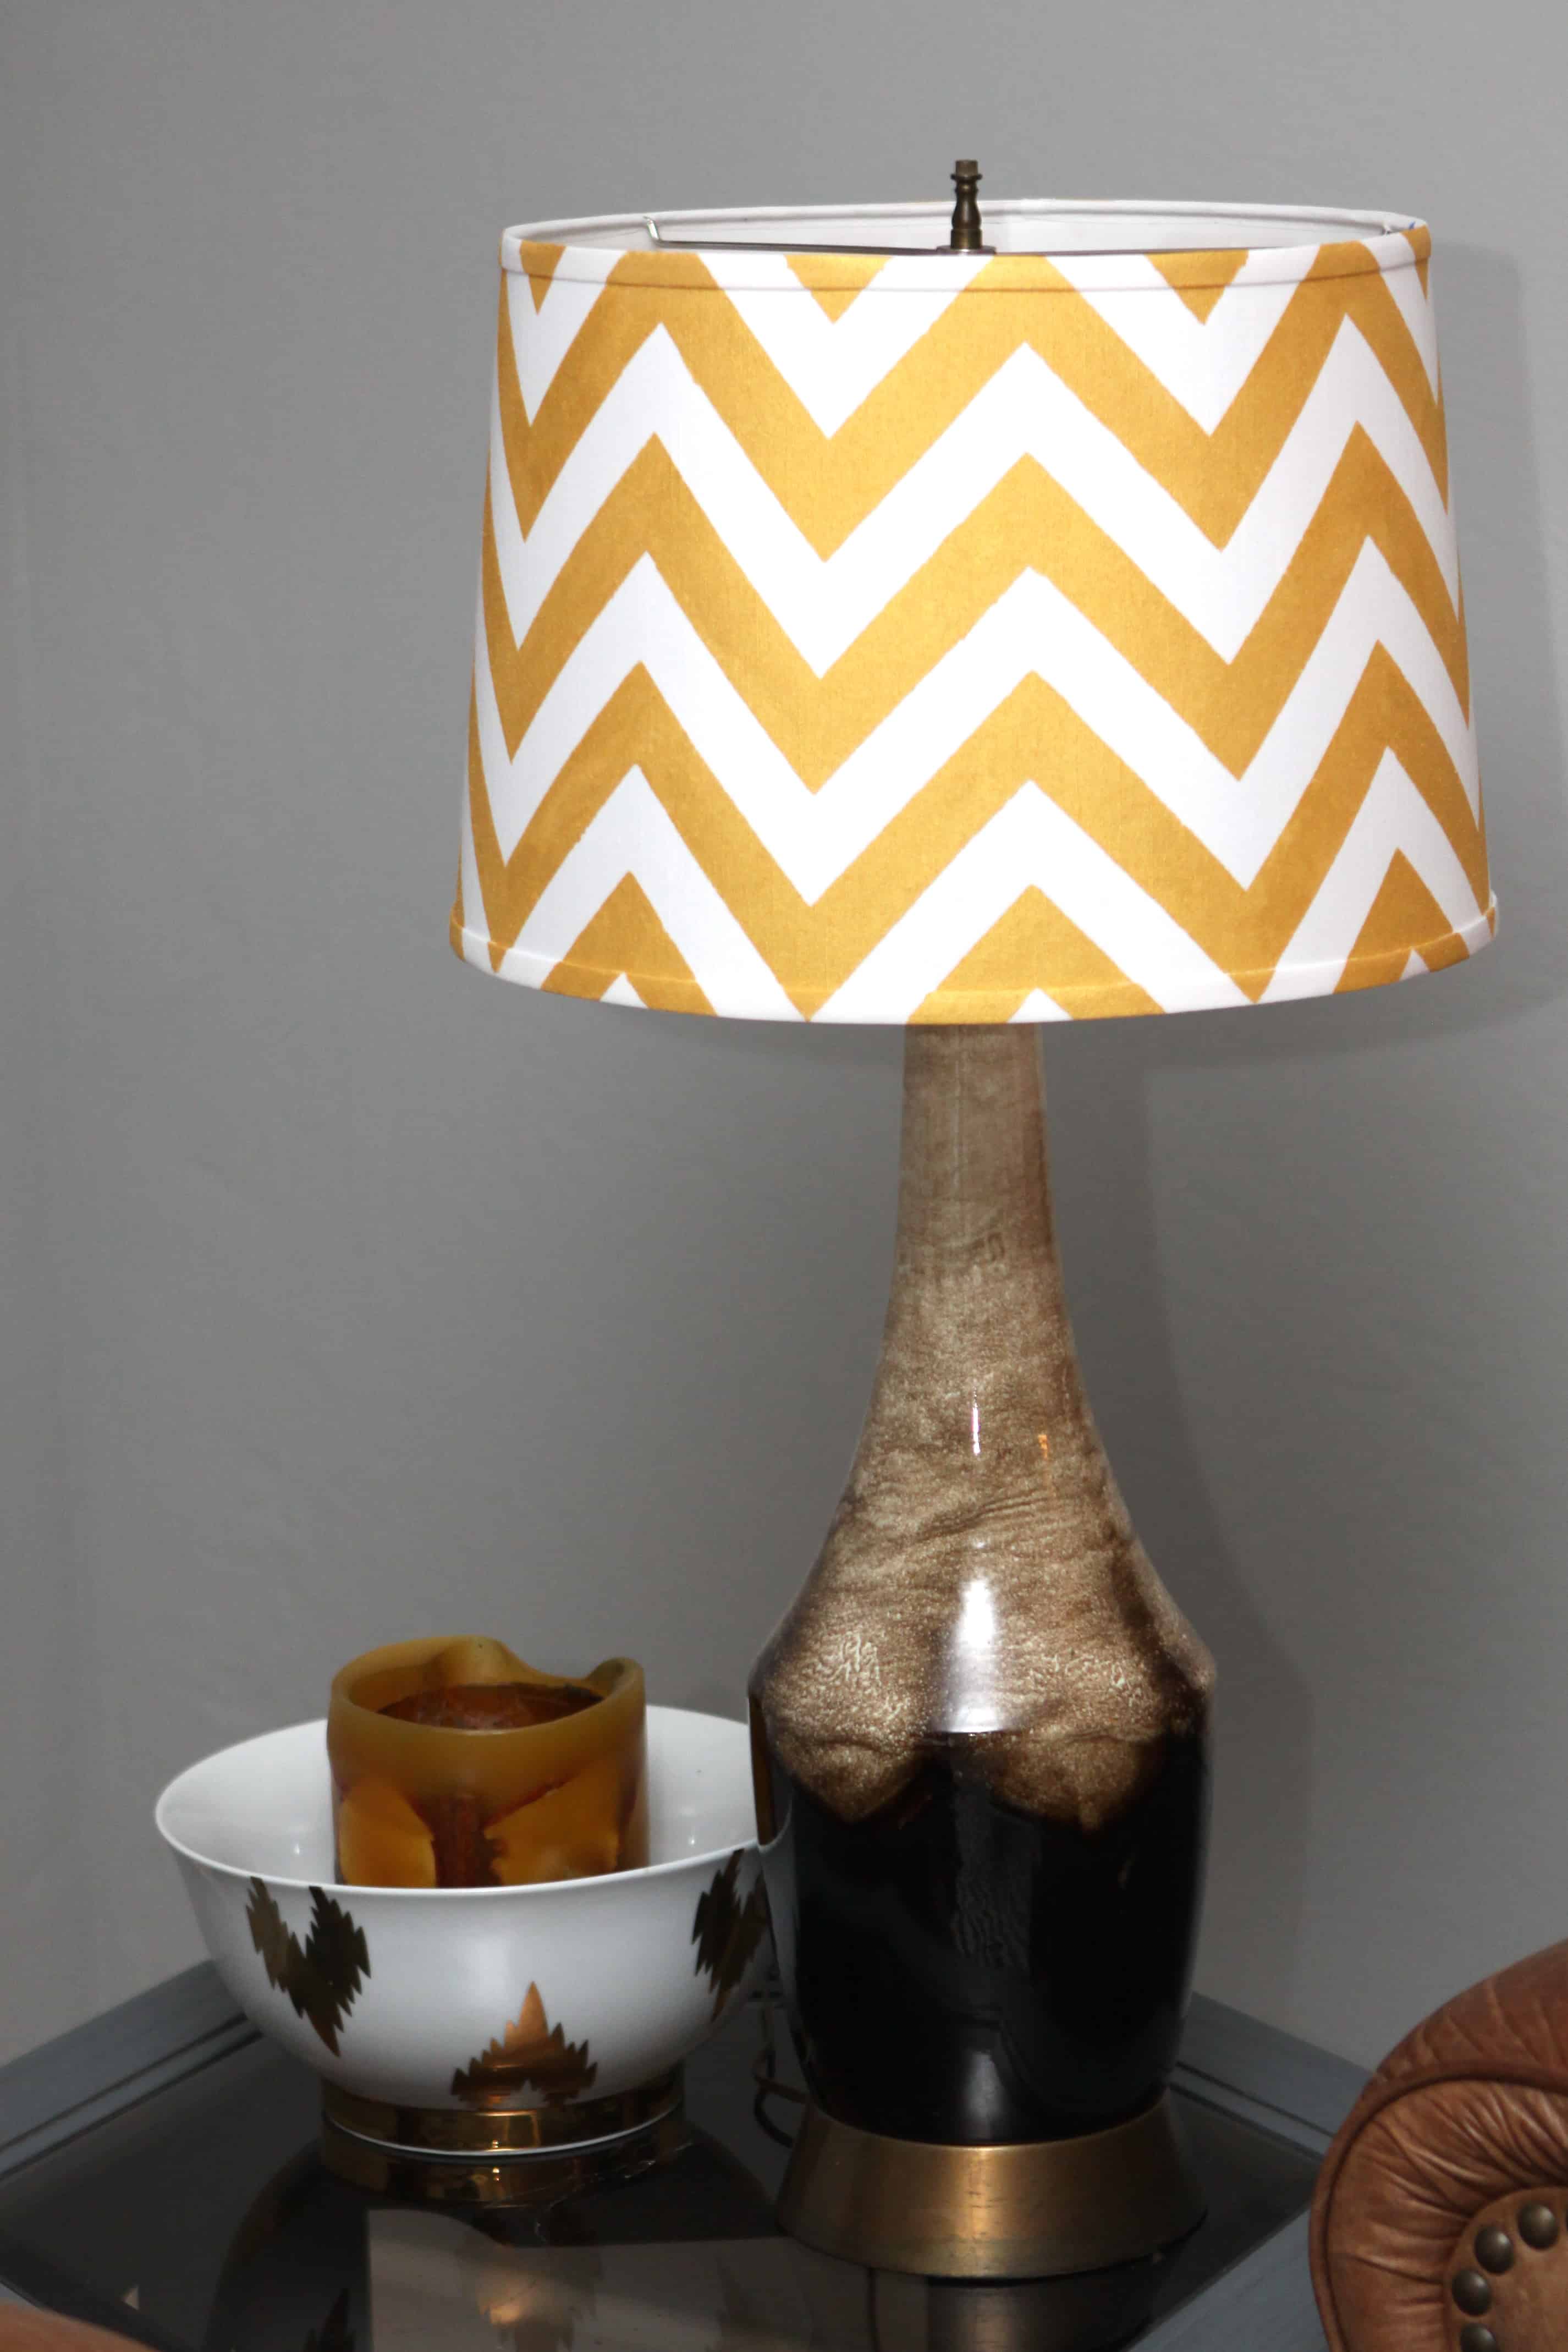 #1 paint your lampshade